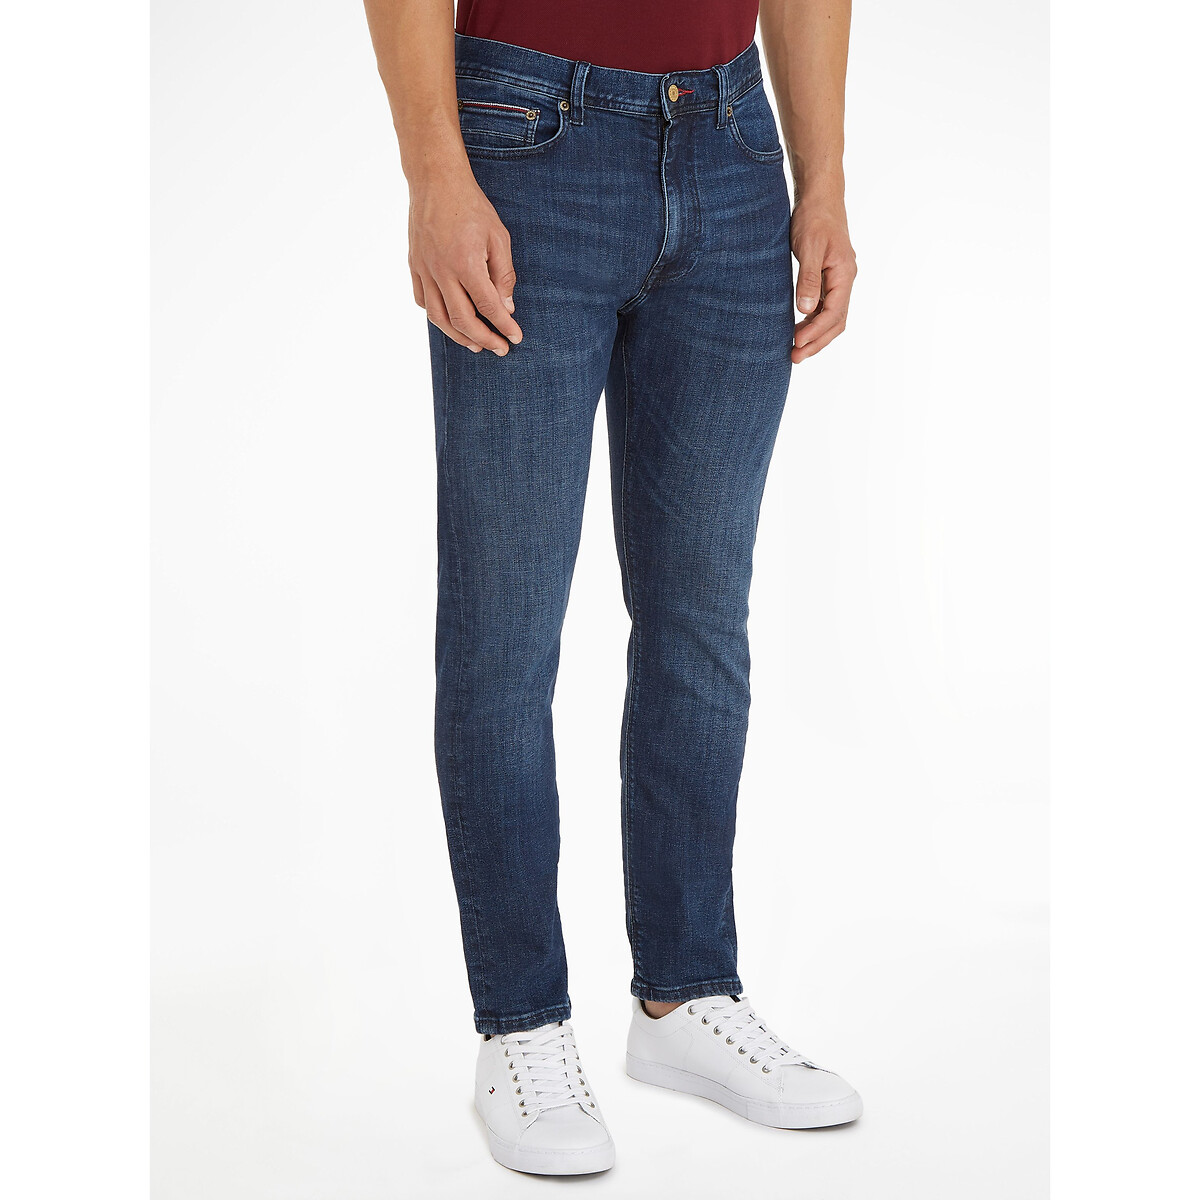 Image of Bleecker Slim Fit Jeans in Mid Rise